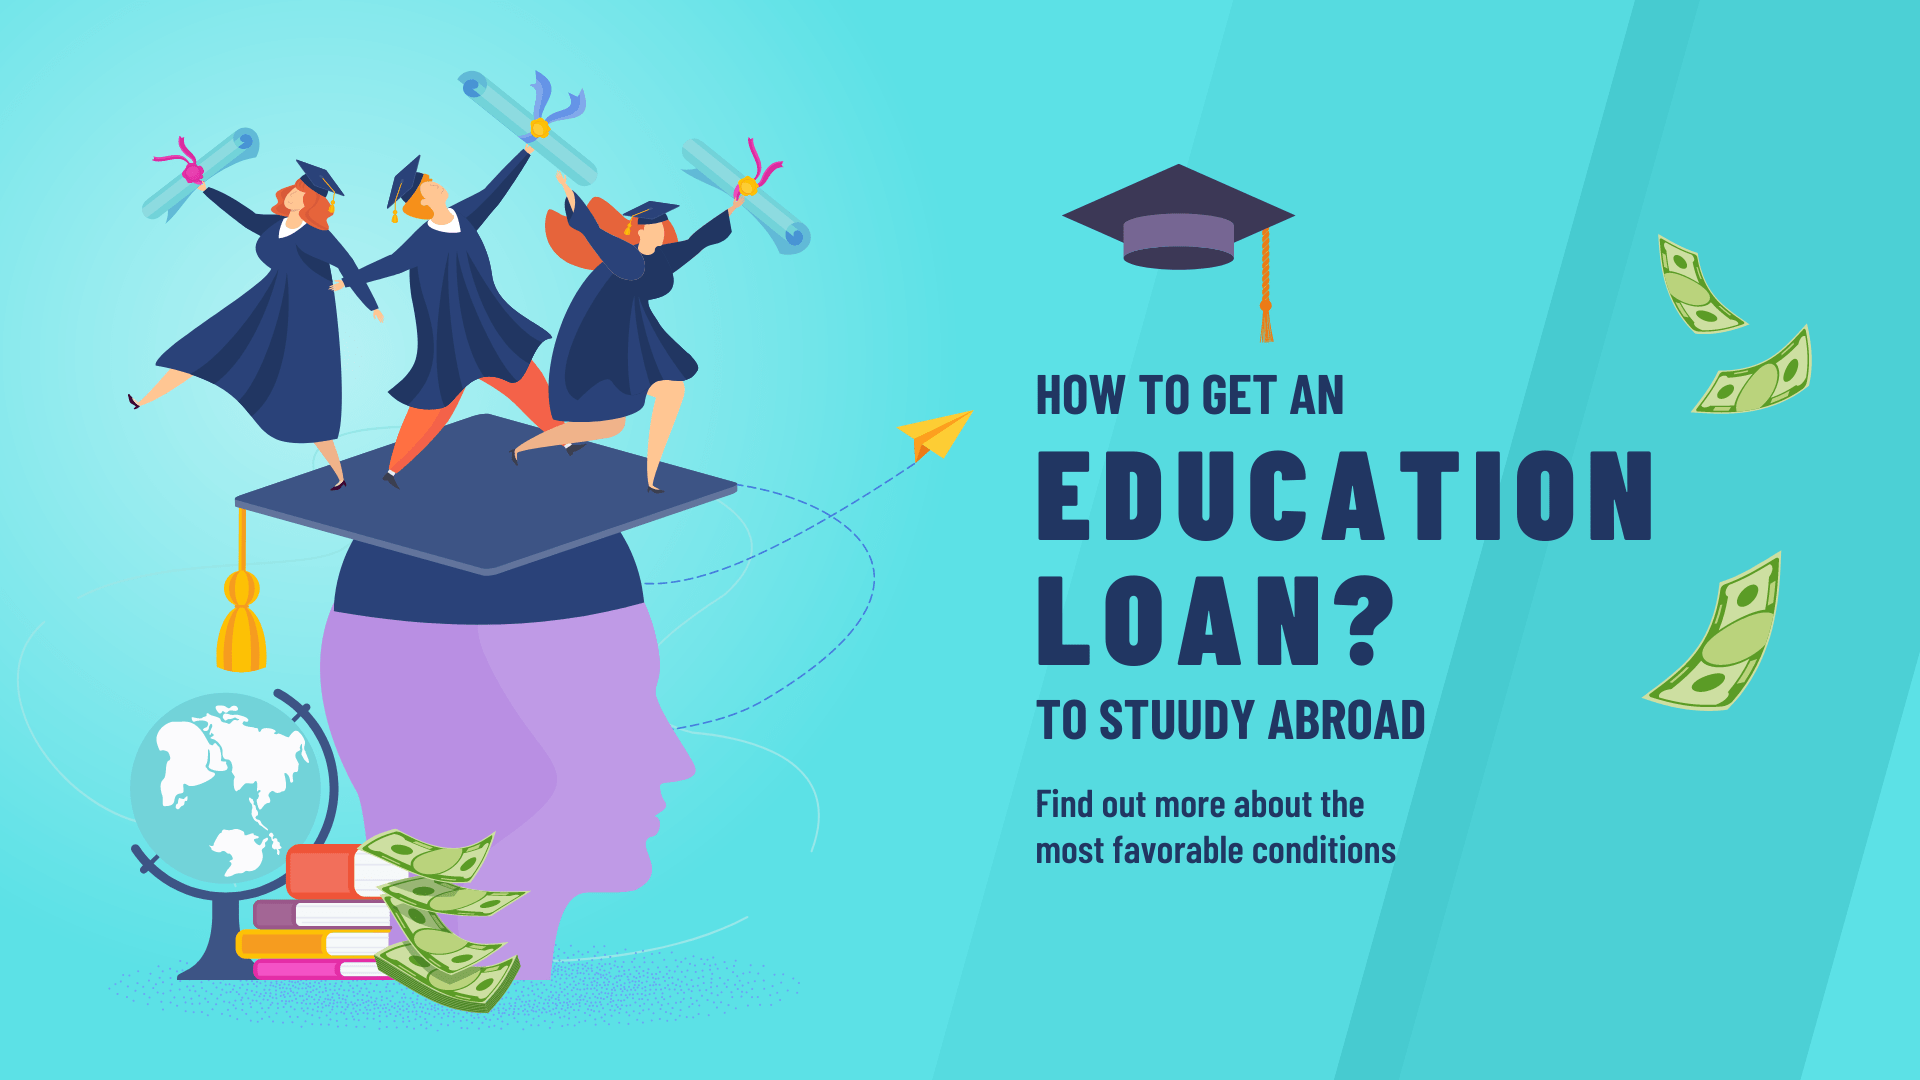 How To Get An Education Loan To Study Abroad